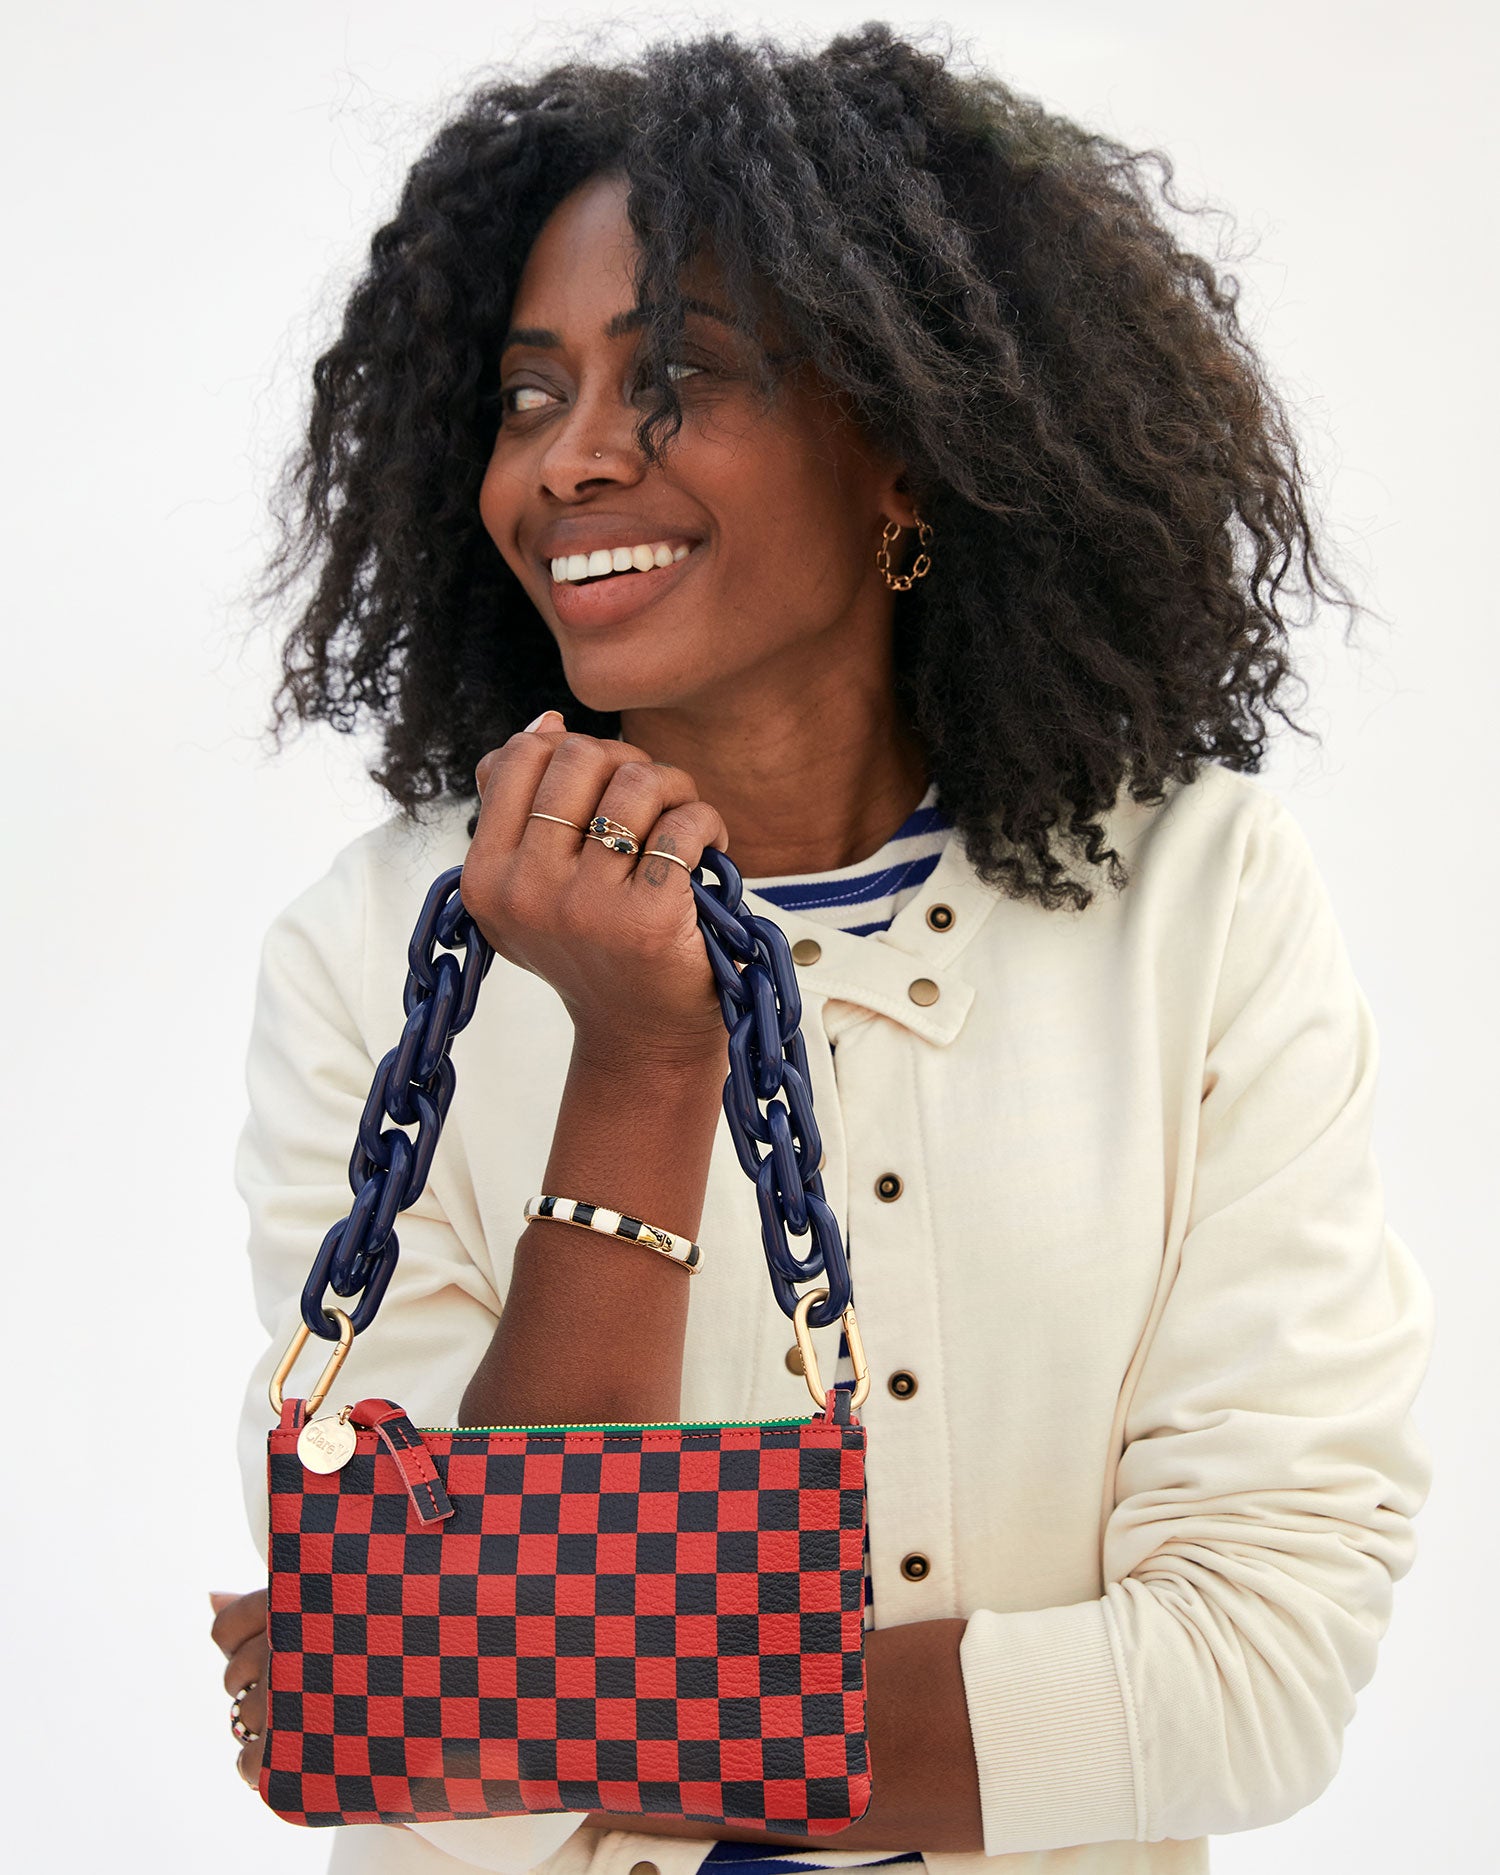 mecca in a white jacket carrying the Red and Navy Checker Wallet Clutch w/ Tabs  by the navy resin shortie strap